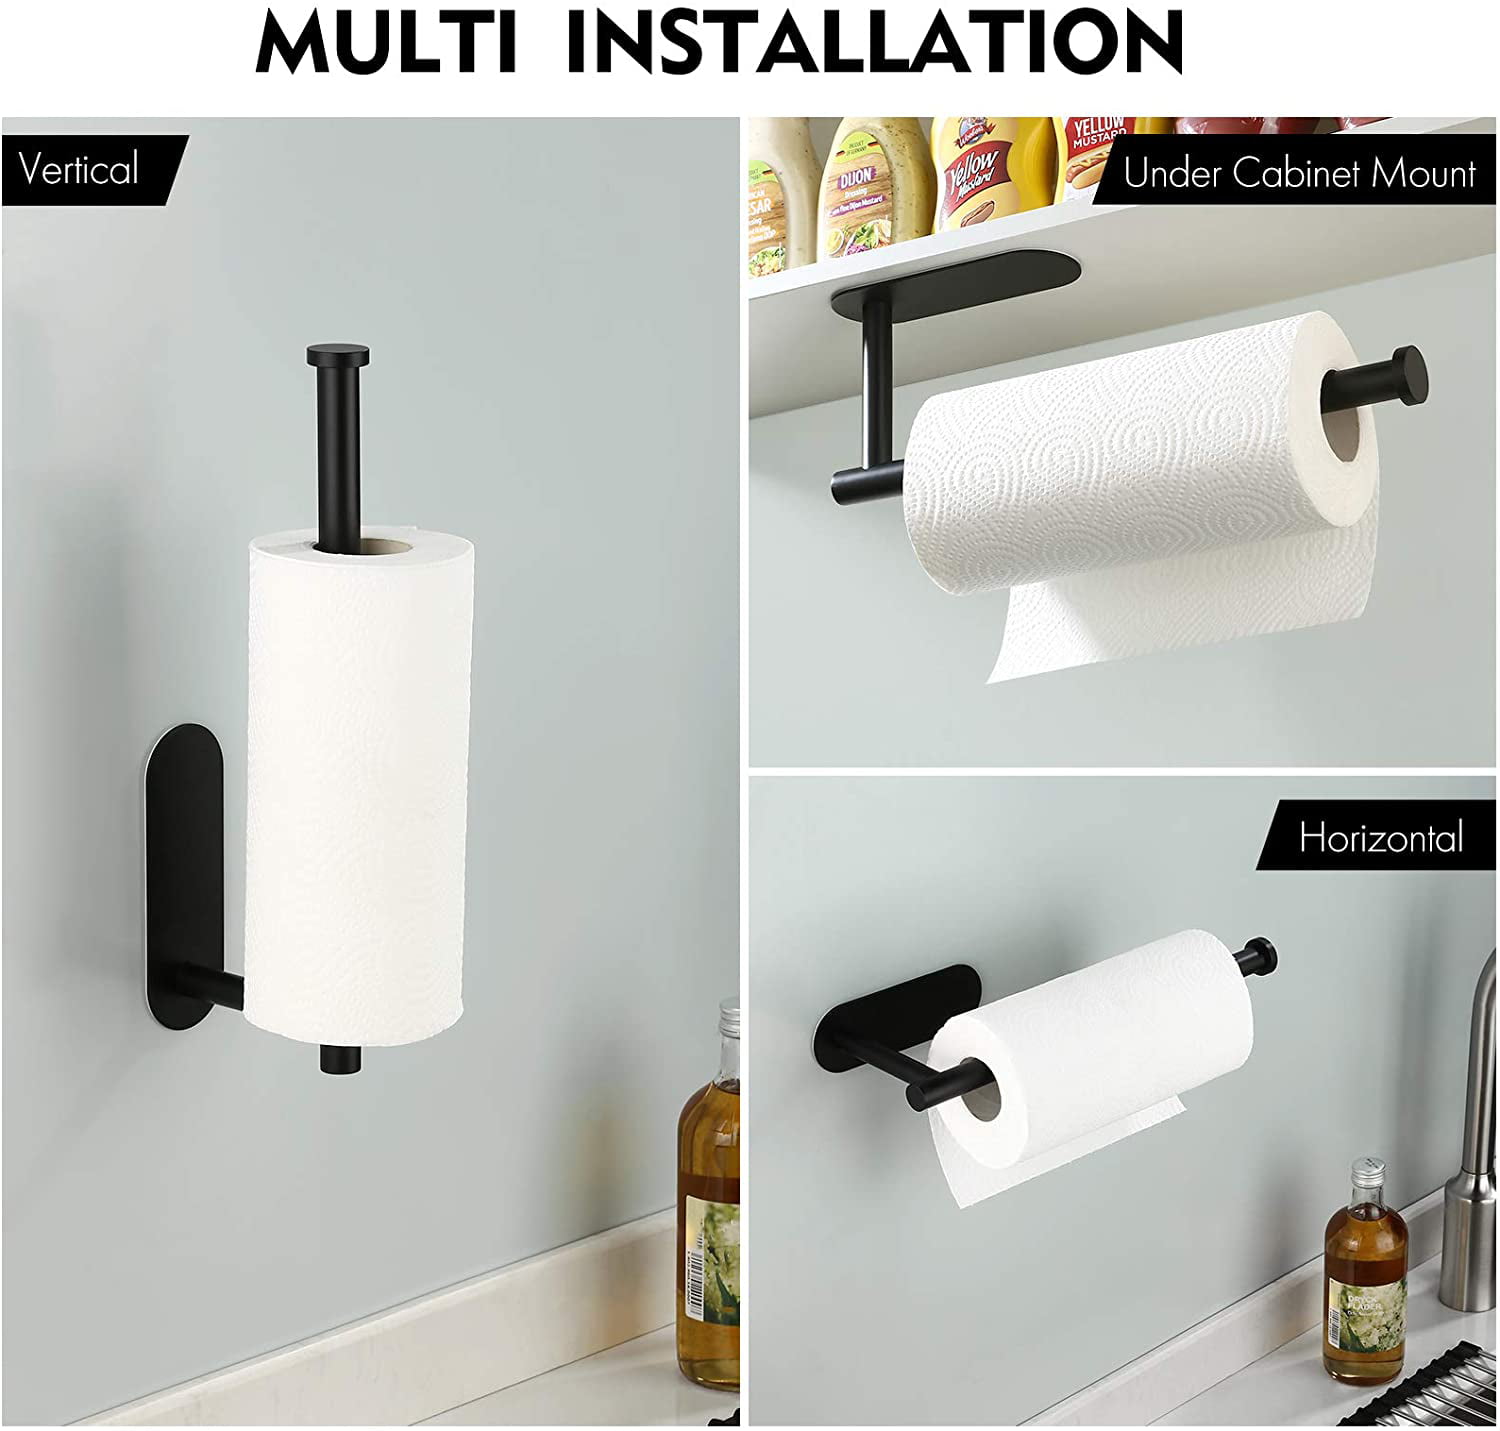 KES Kitchen Roll Holder Under Cabinet Paper Towel Holder Self Adhesive Kitchen Roll Dispenser Wall Mounted SUS304 Stainless Steel Brushed Finish A7170S30-2 